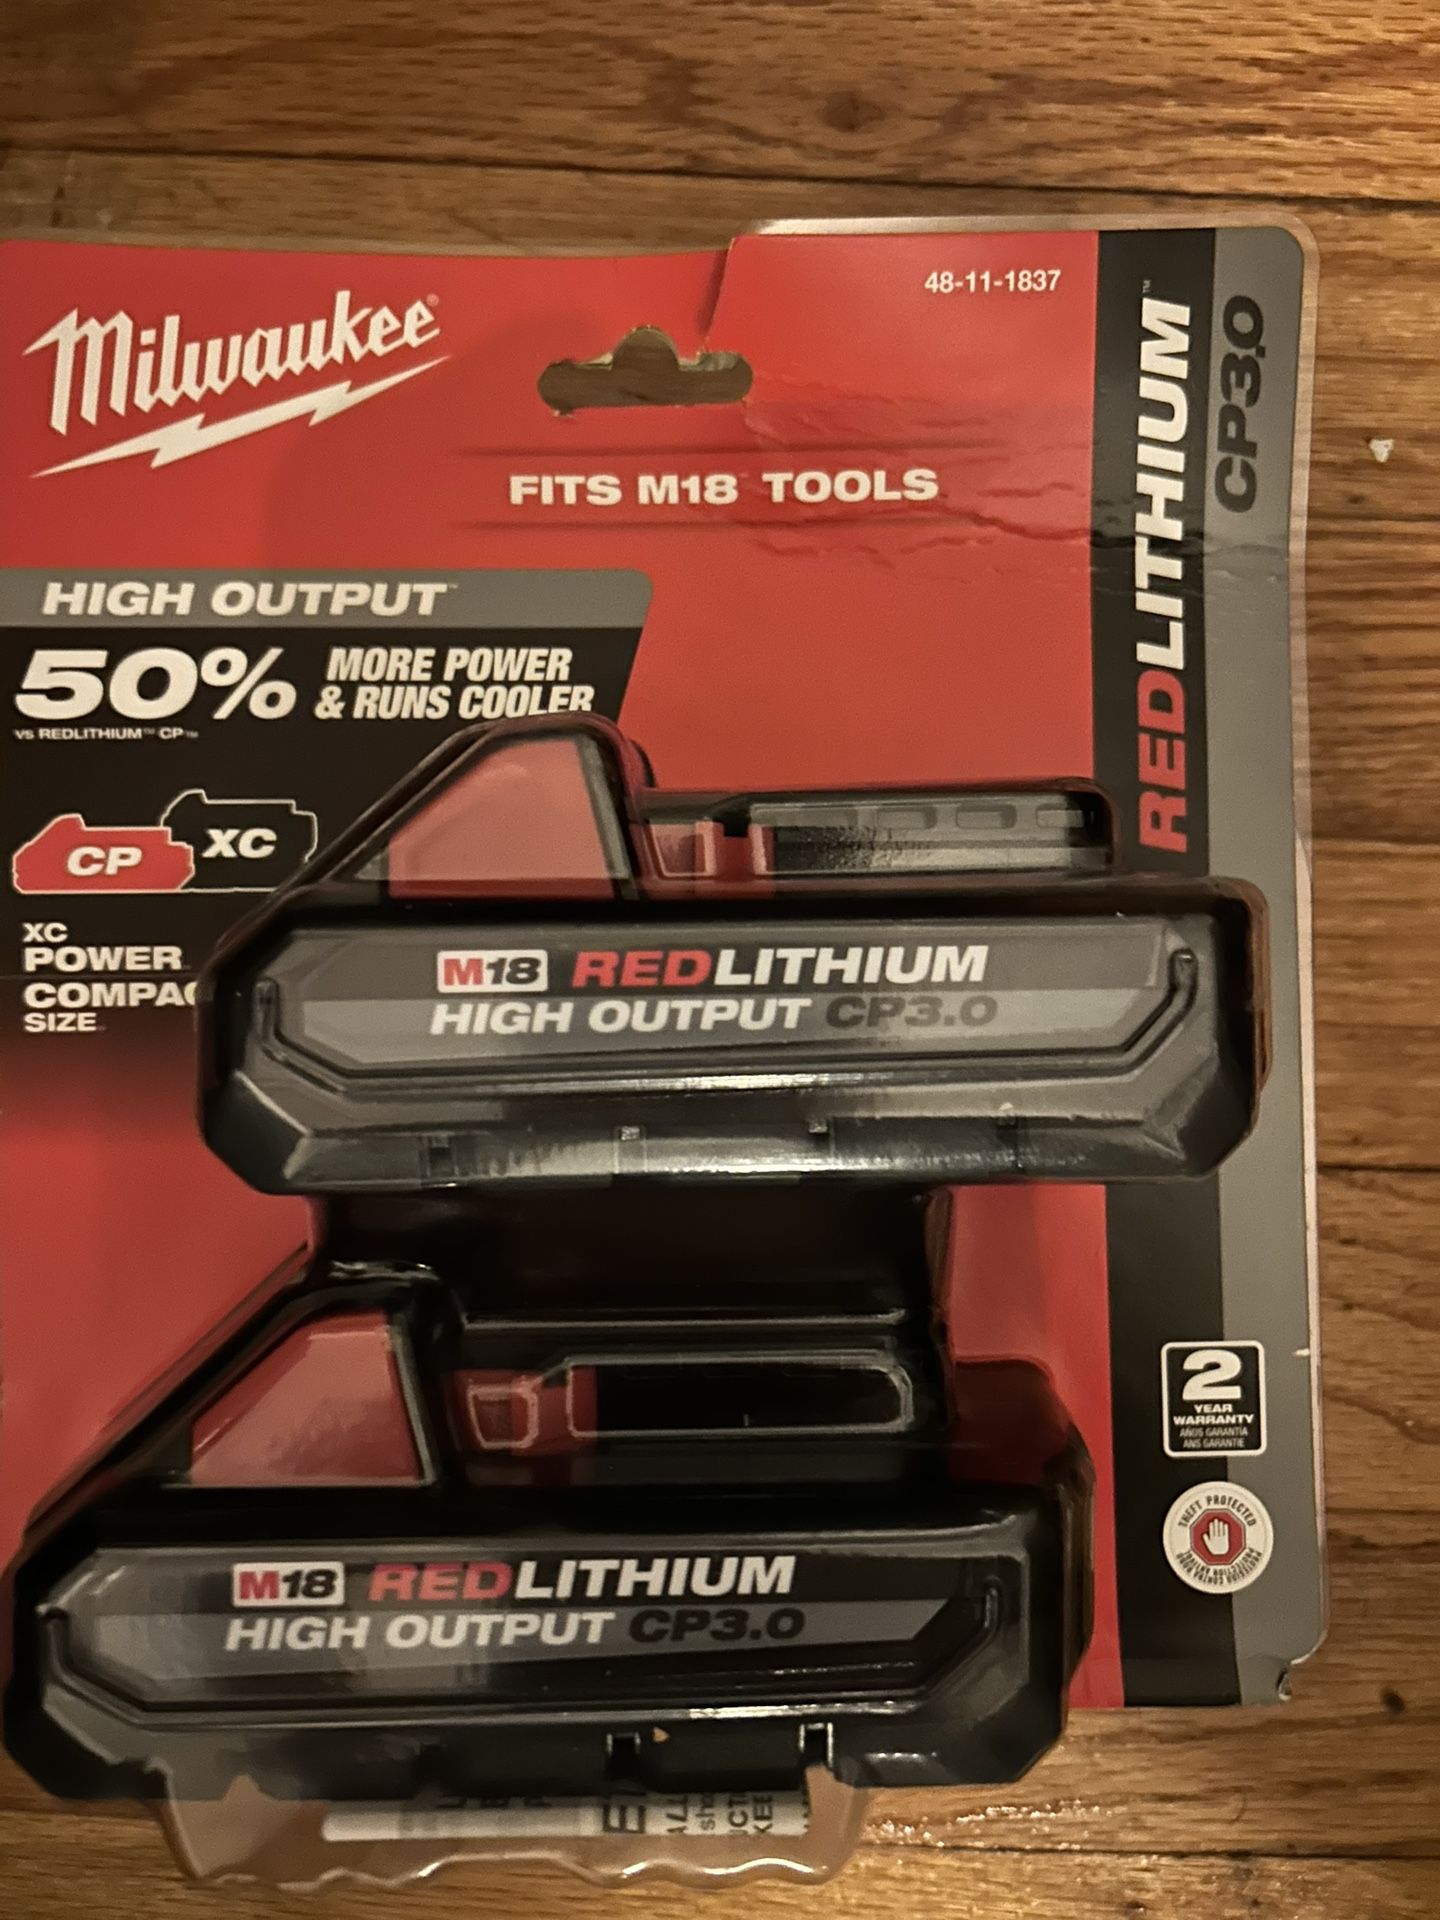 Milwaukee M18 REDLITHIUM CP3.0 18 V 3 Ah Lithium-Ion High Output Battery Pack 2 pc